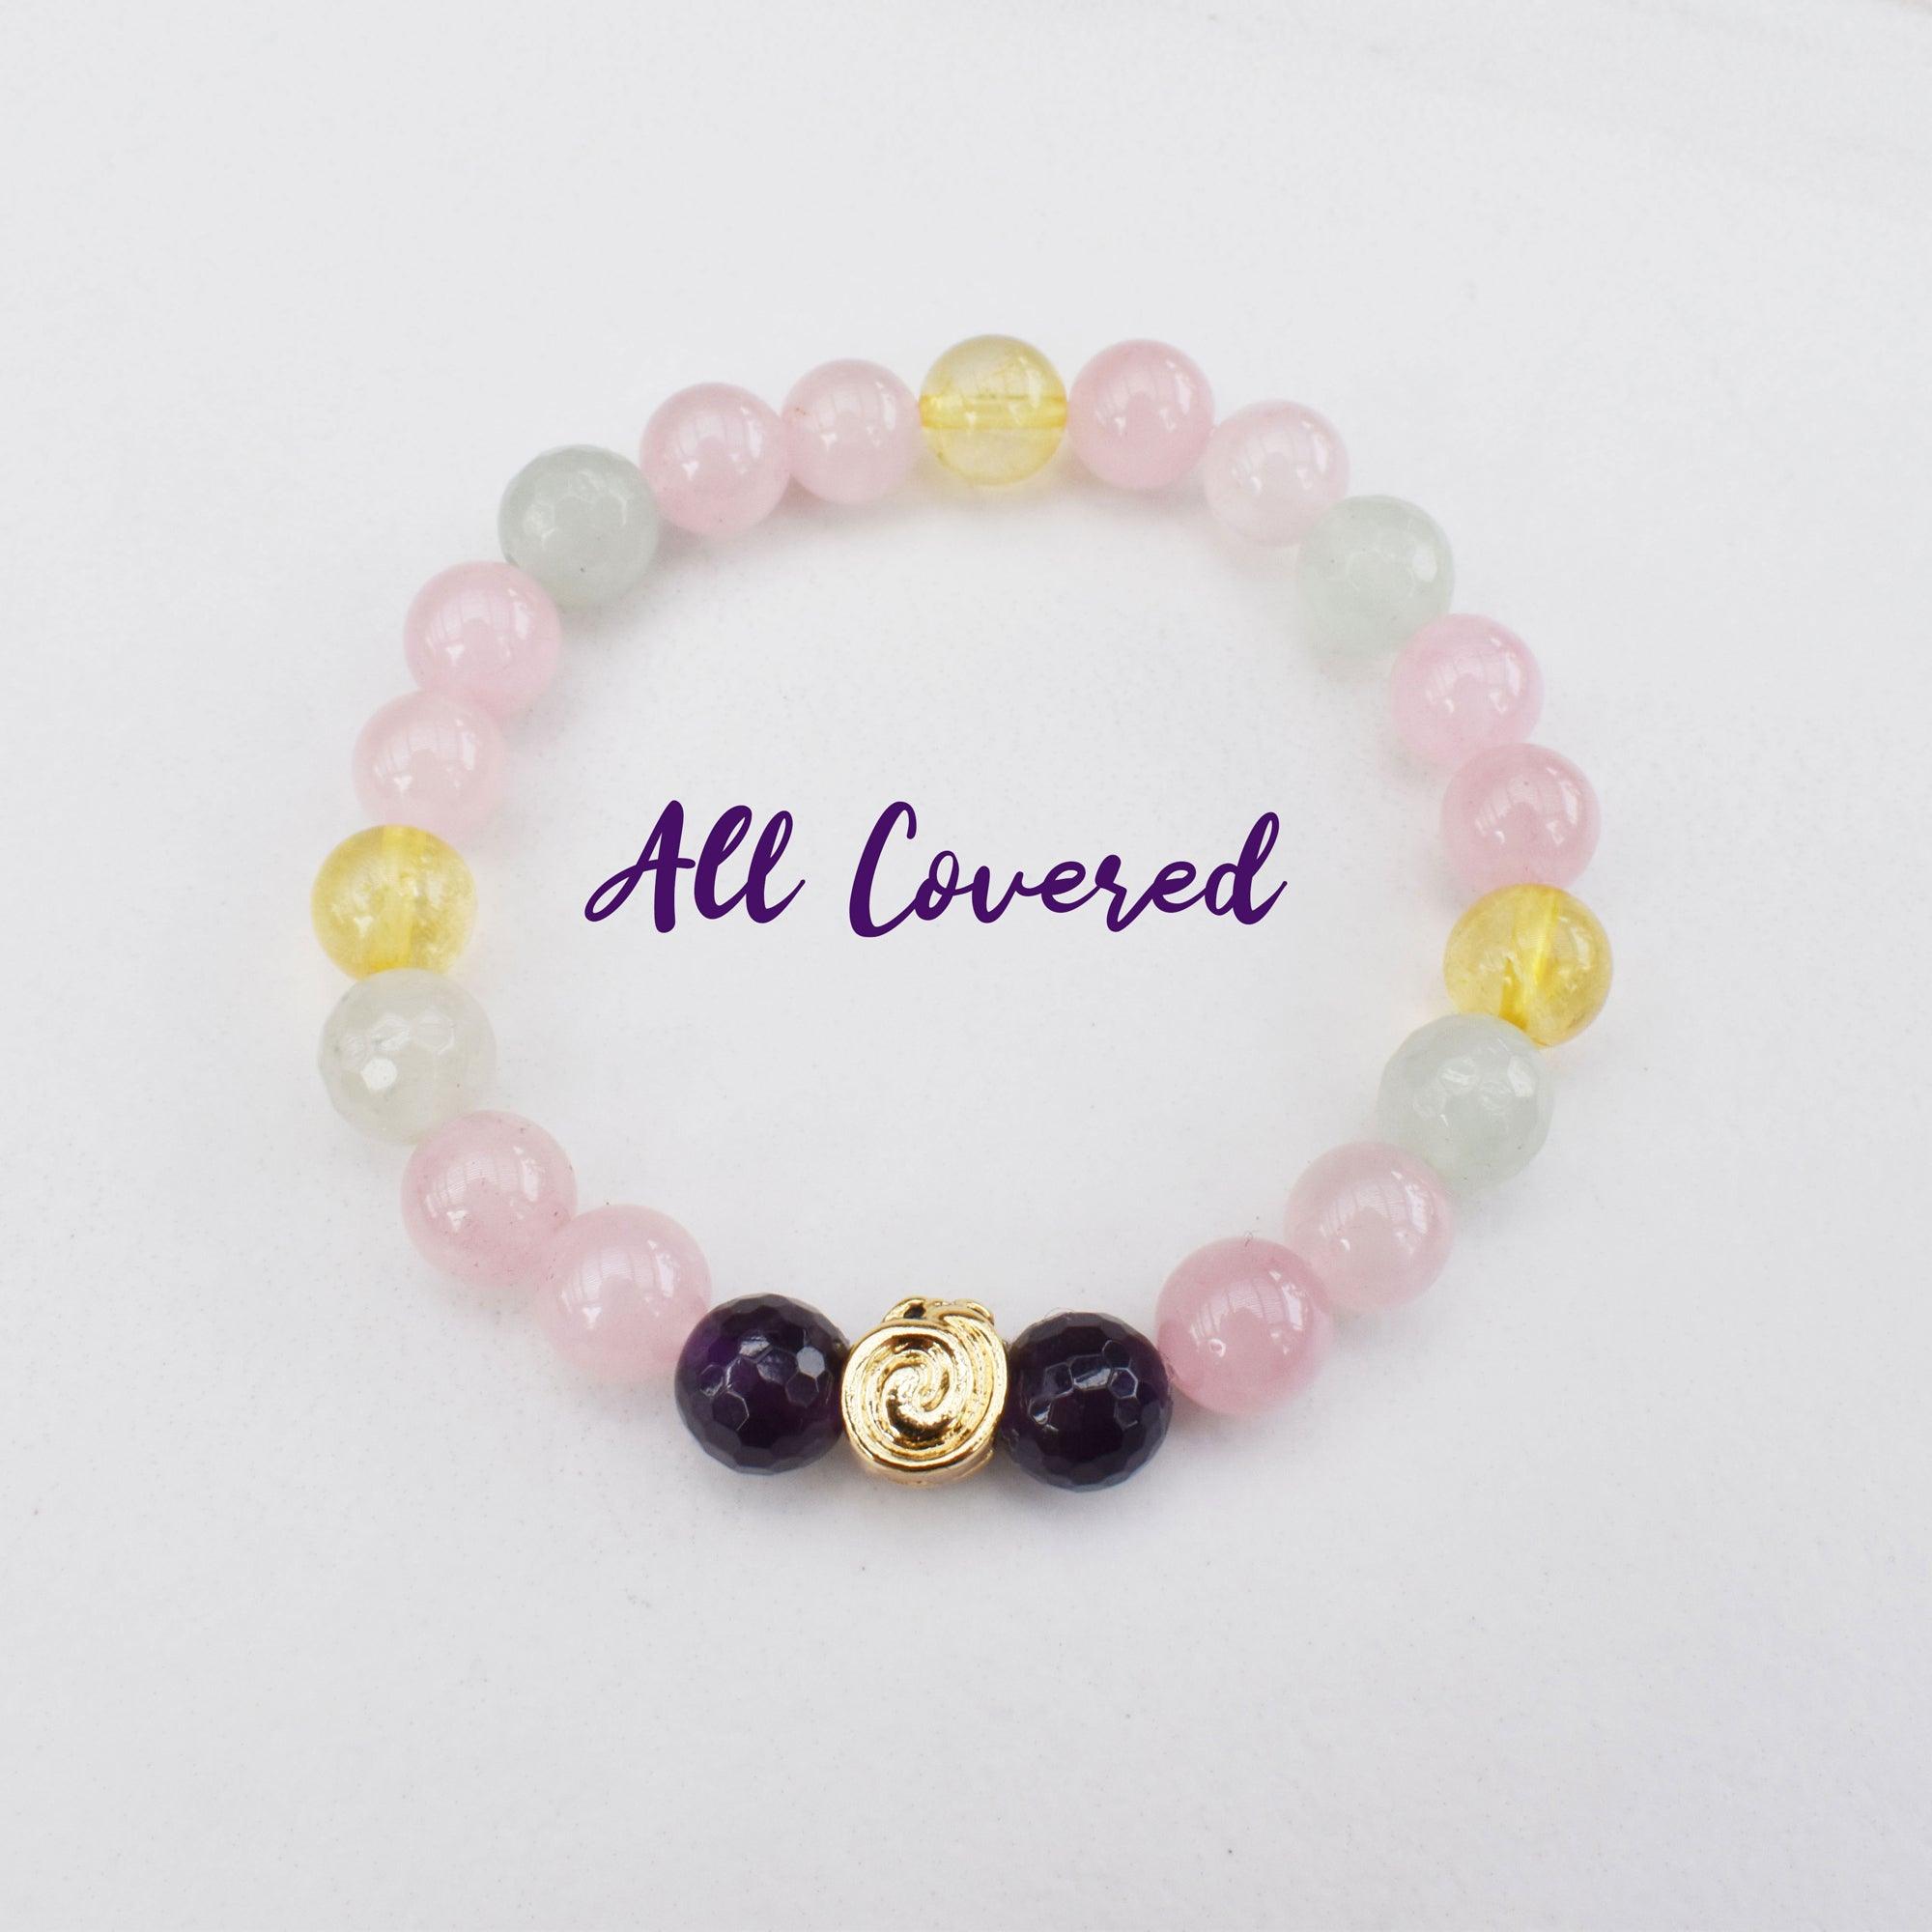 All Covered Bracelet for Love, Wealth, Happiness and Protection